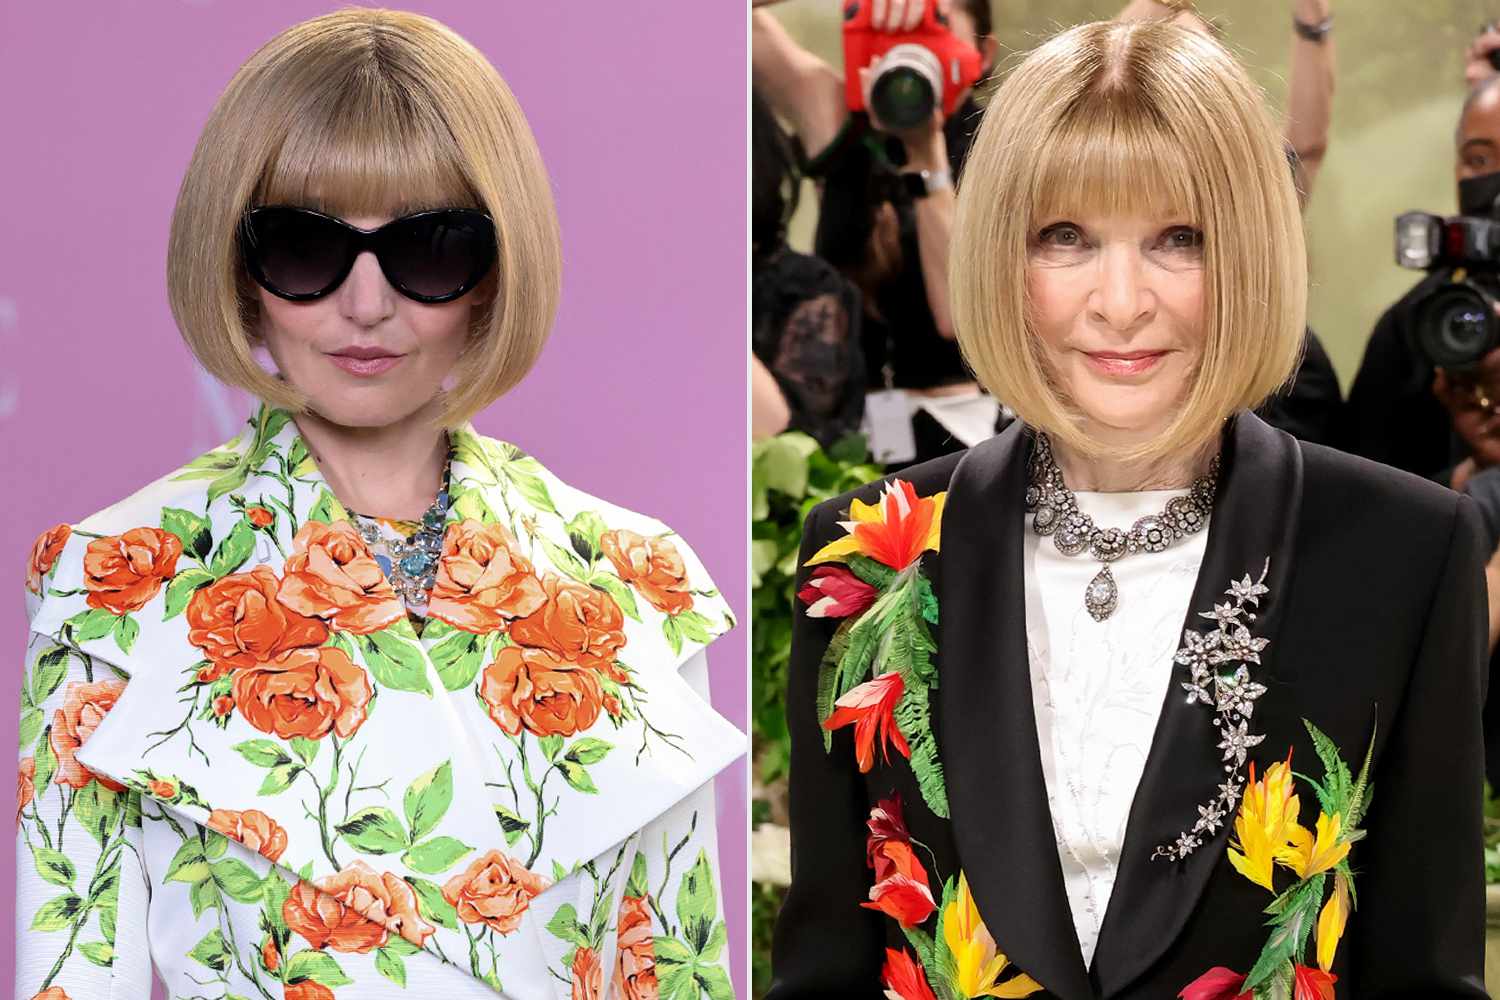 'SNL' star Chloe Fineman does spot-on impression of Anna Wintour at the Met Gala